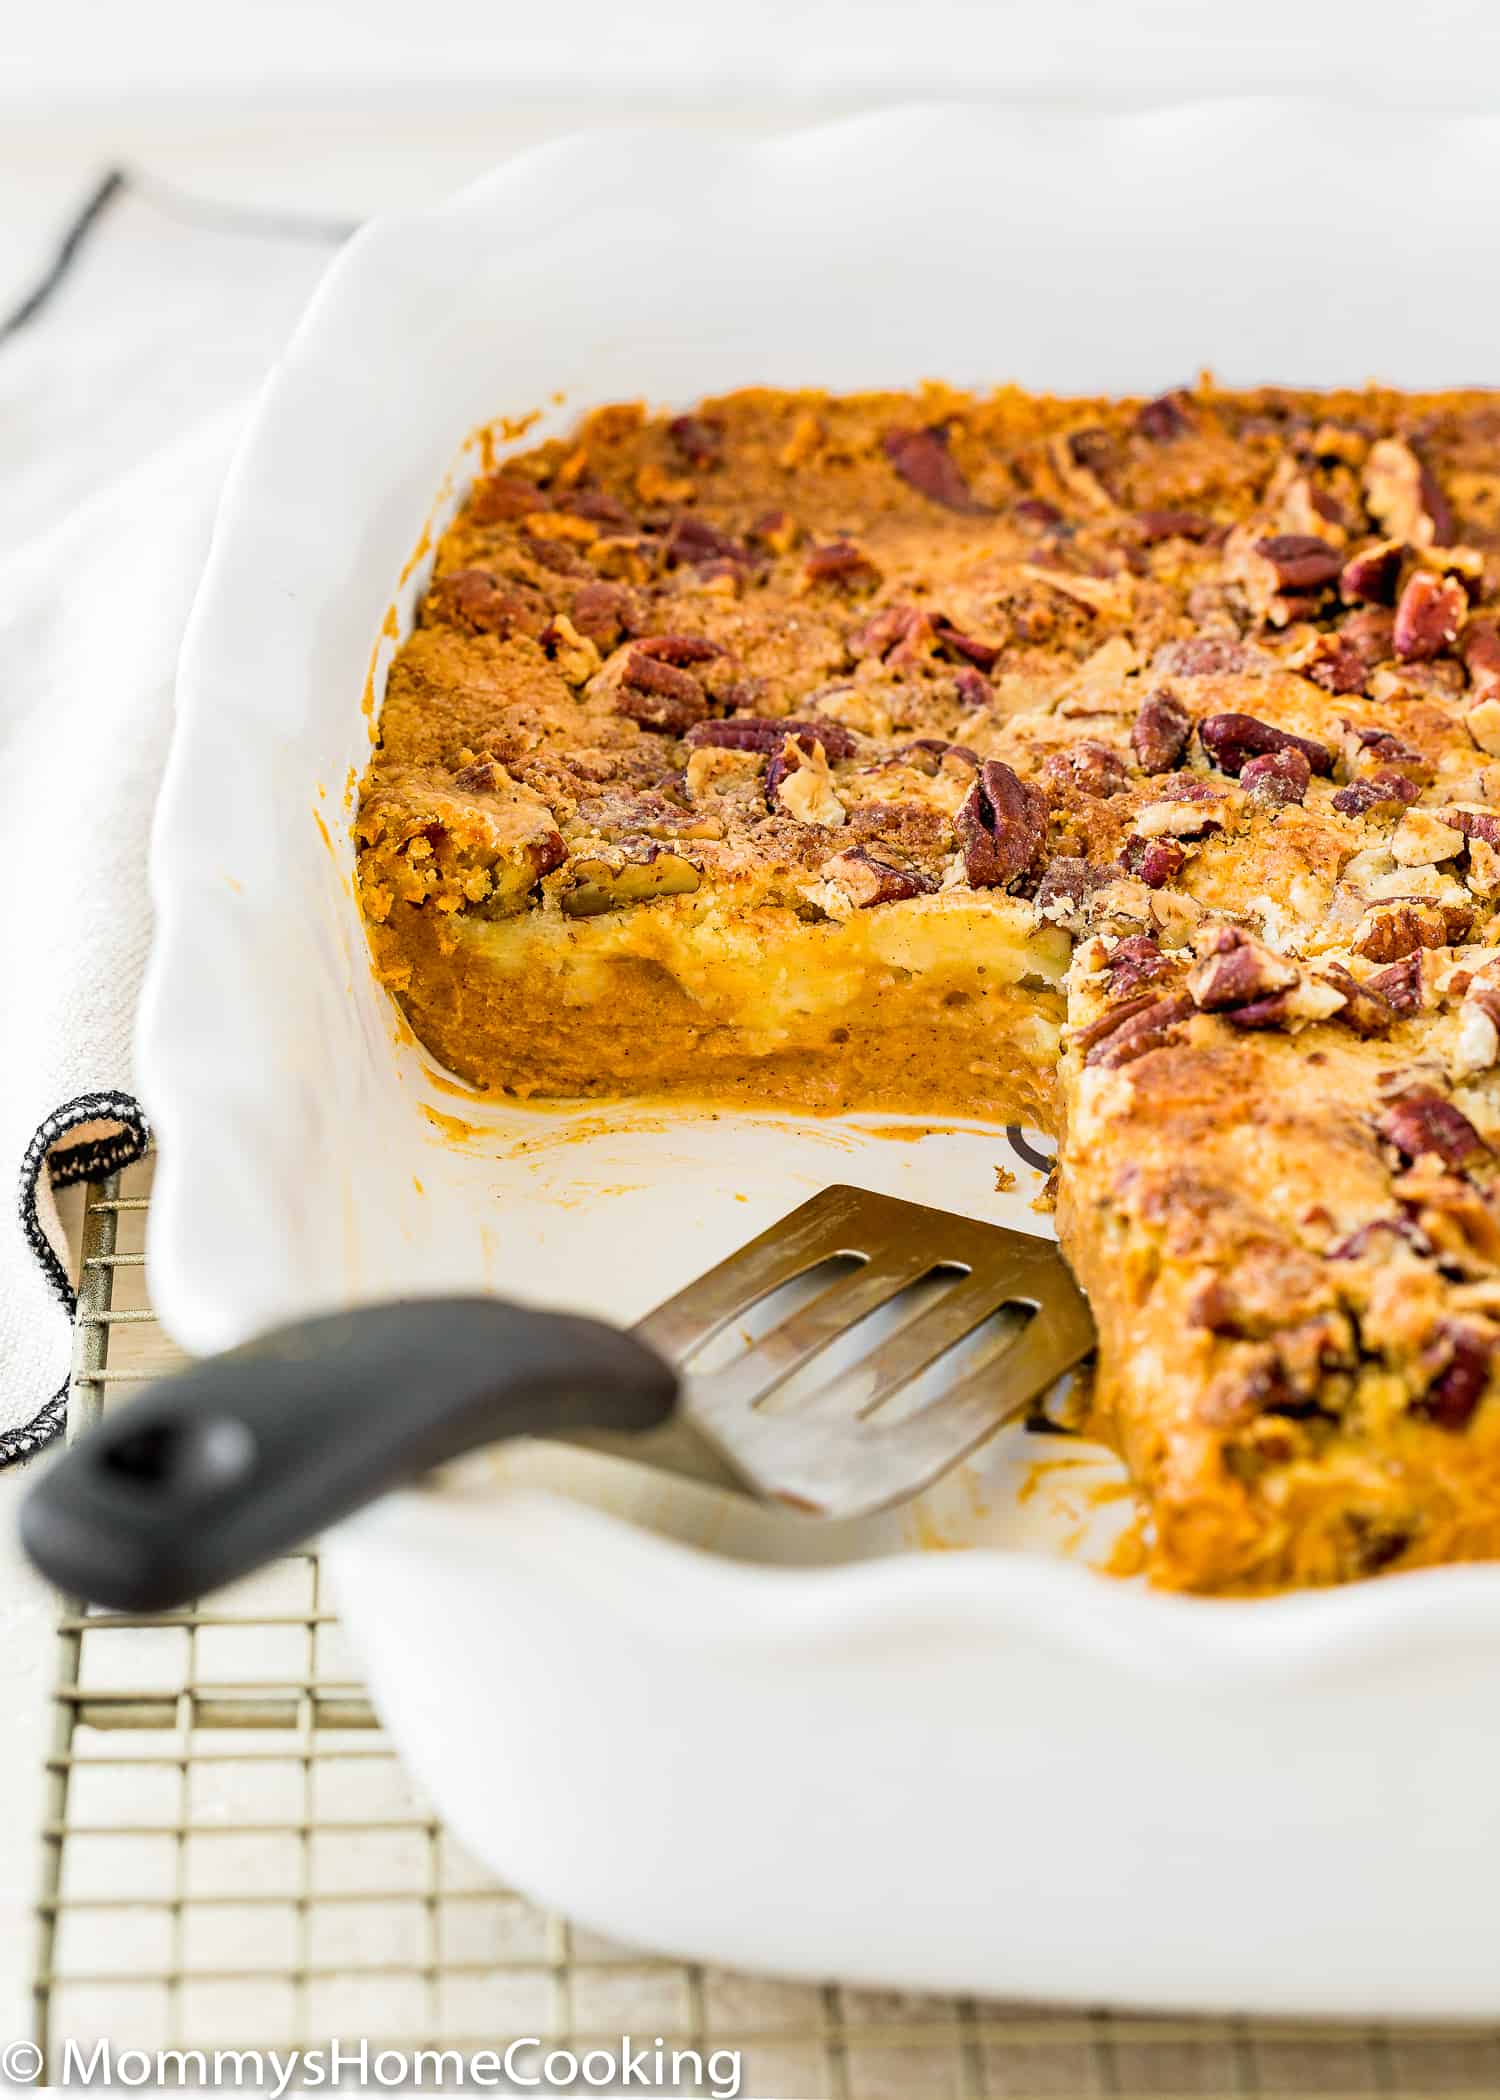 Egg-Free Pumpkin Dump Cake in a baking dish with a serving spatula